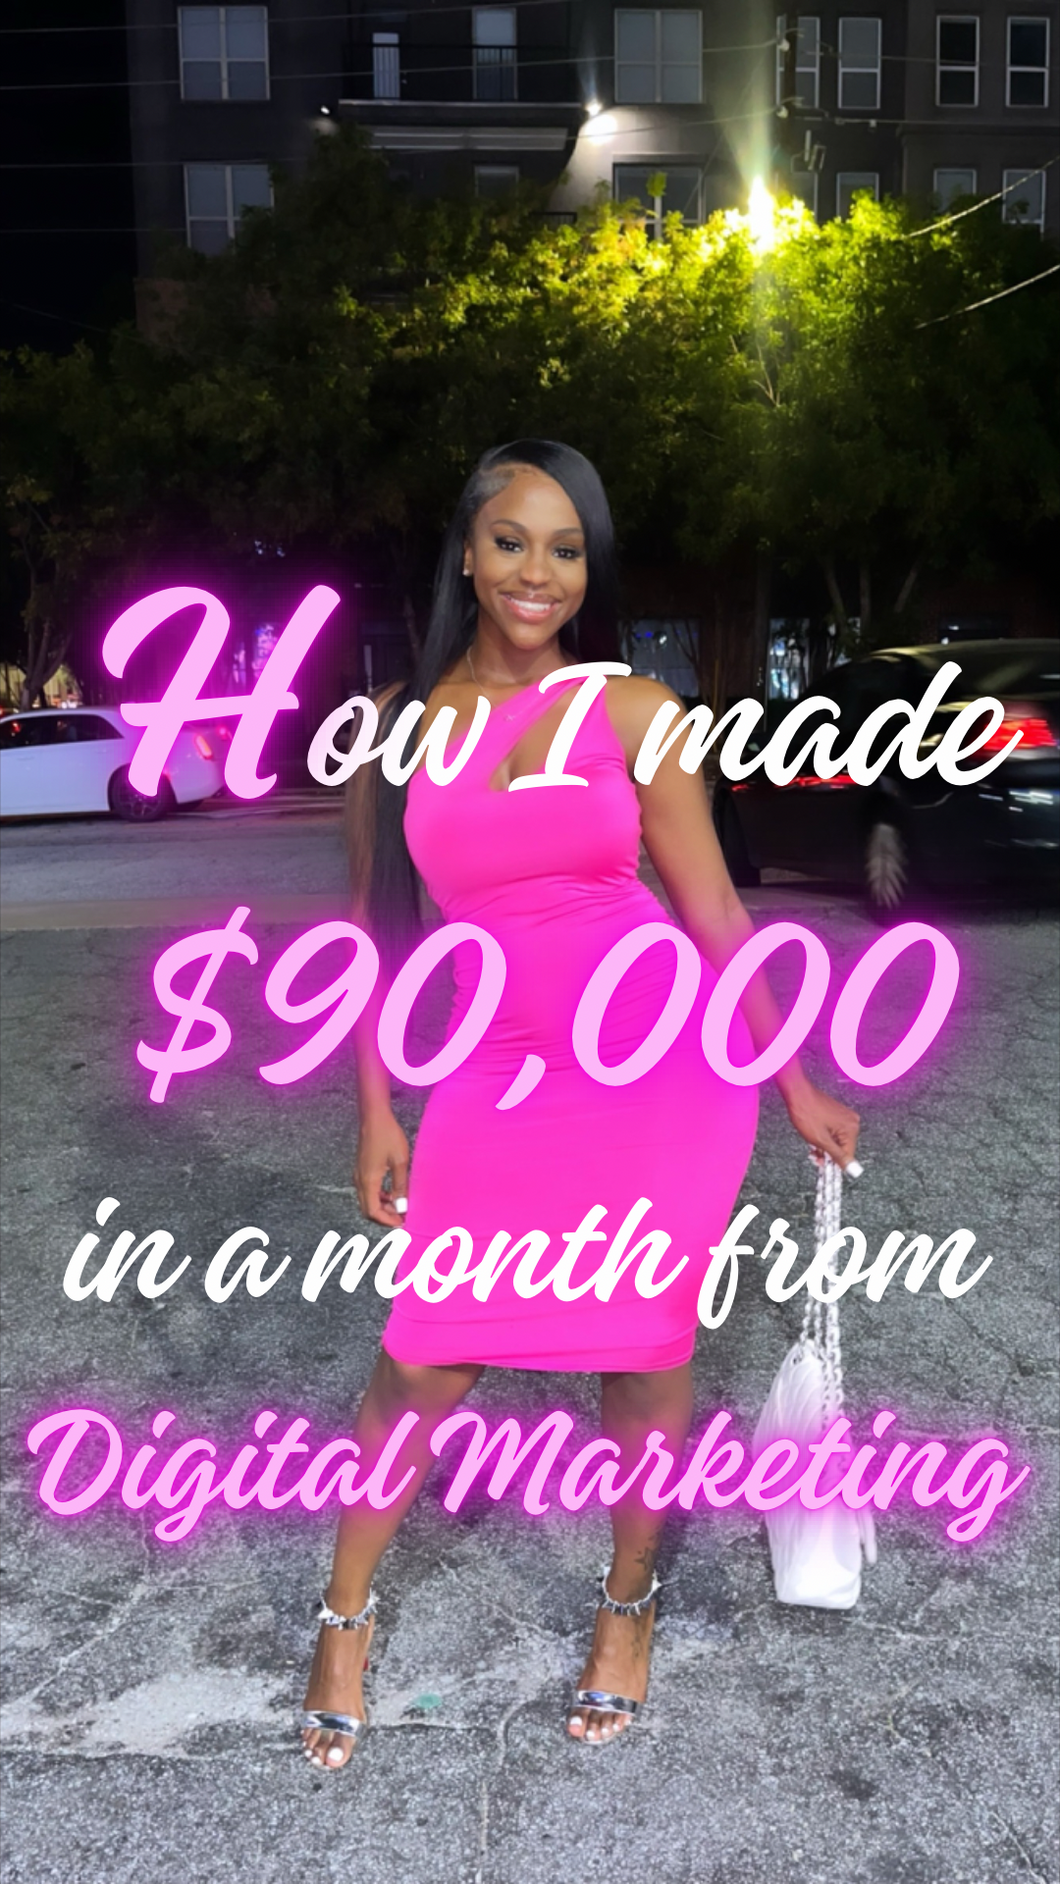 THE INFAMOUS DIGITAL MARKETING COURSE